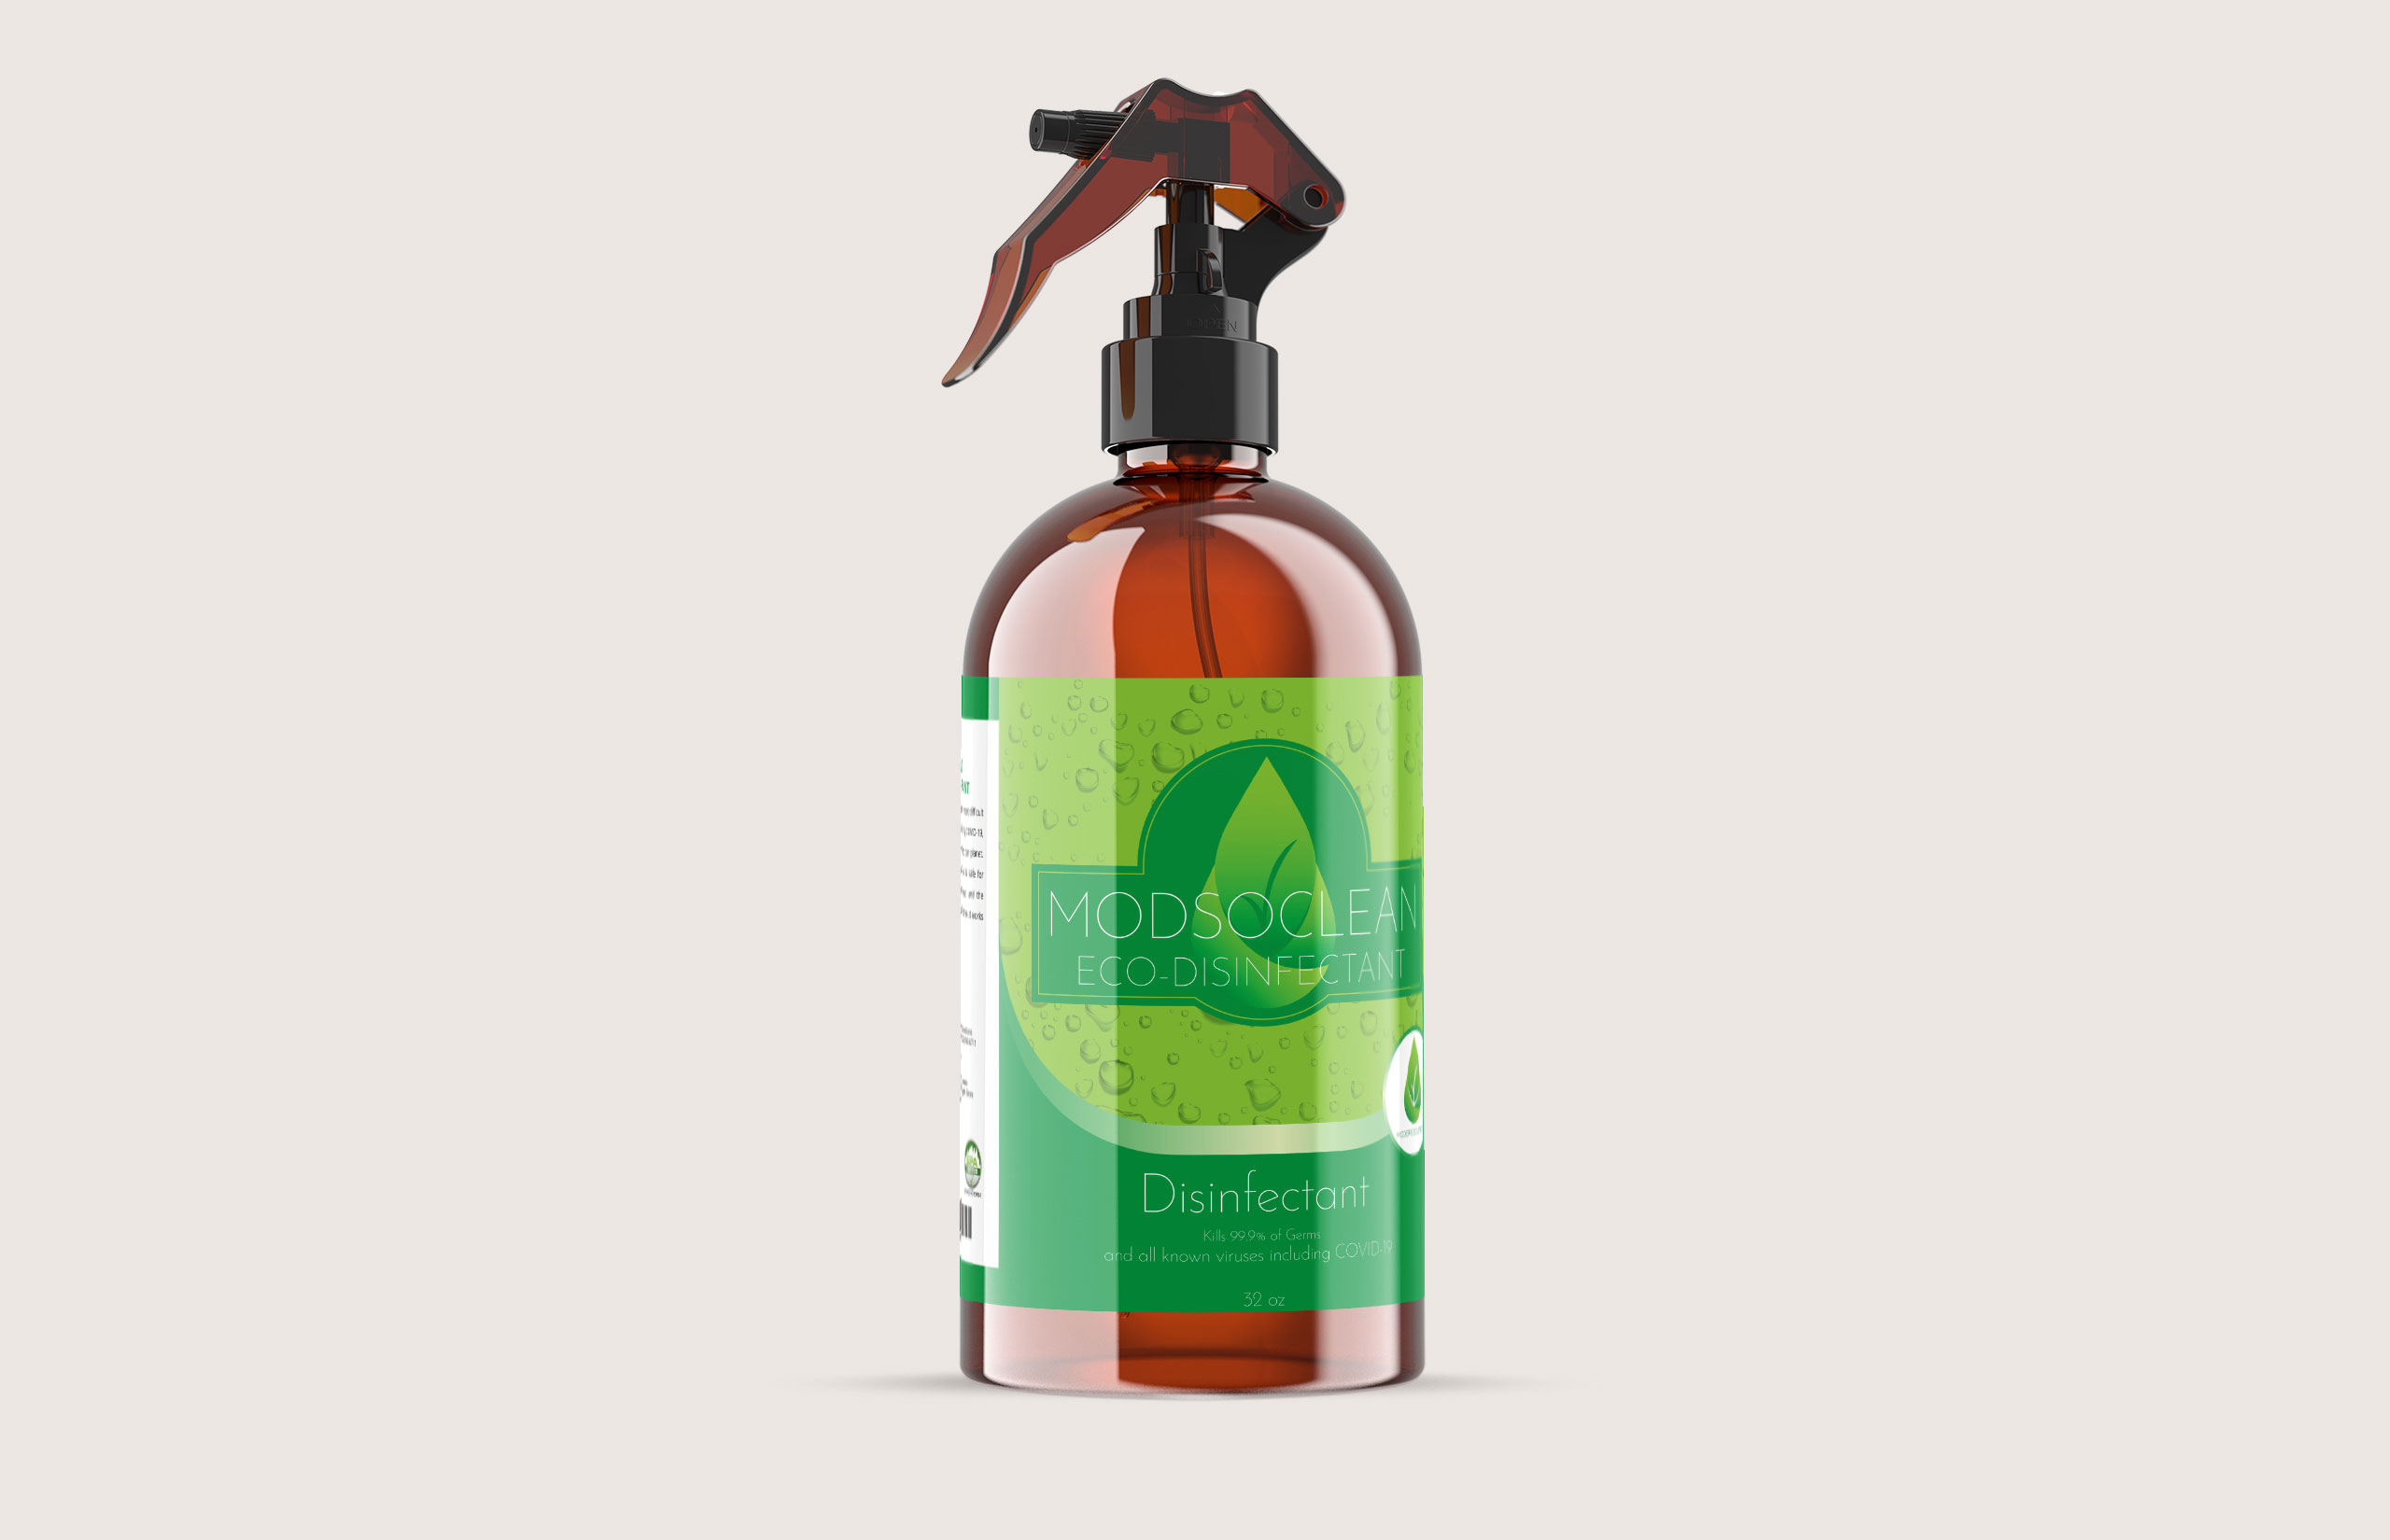 ModsoClean - Eco Disinfectant Spray - Product Label Design